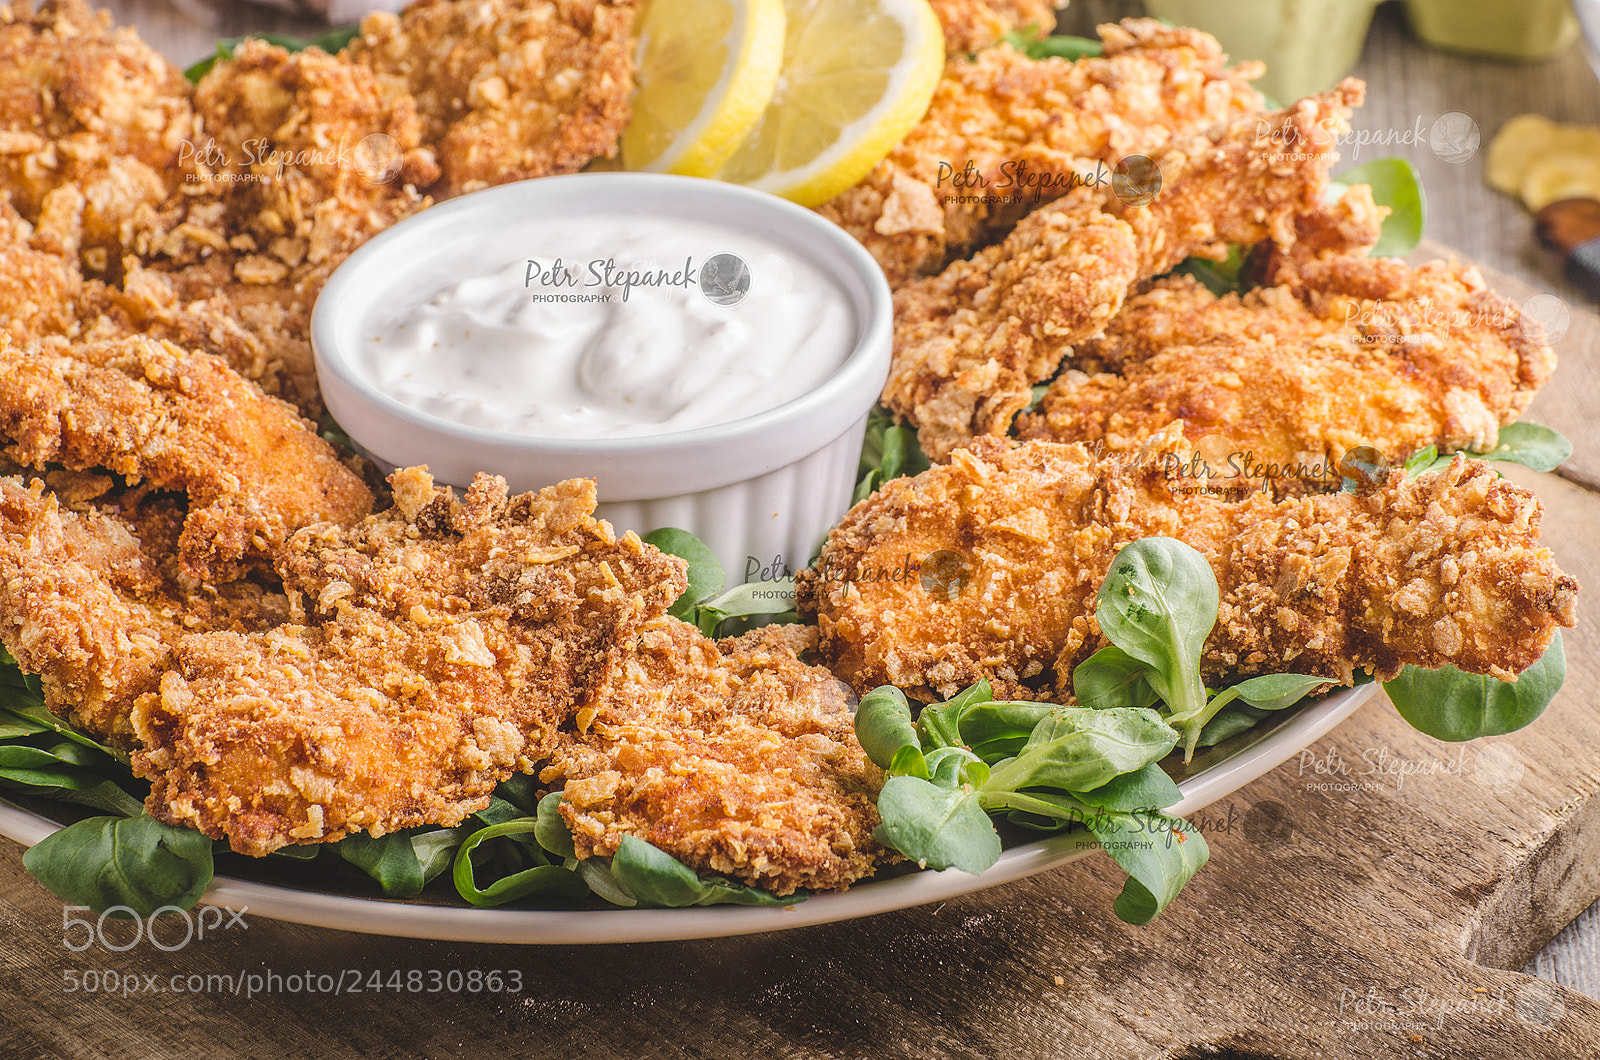 Nikon D7000 sample photo. Chicken strips with delish photography